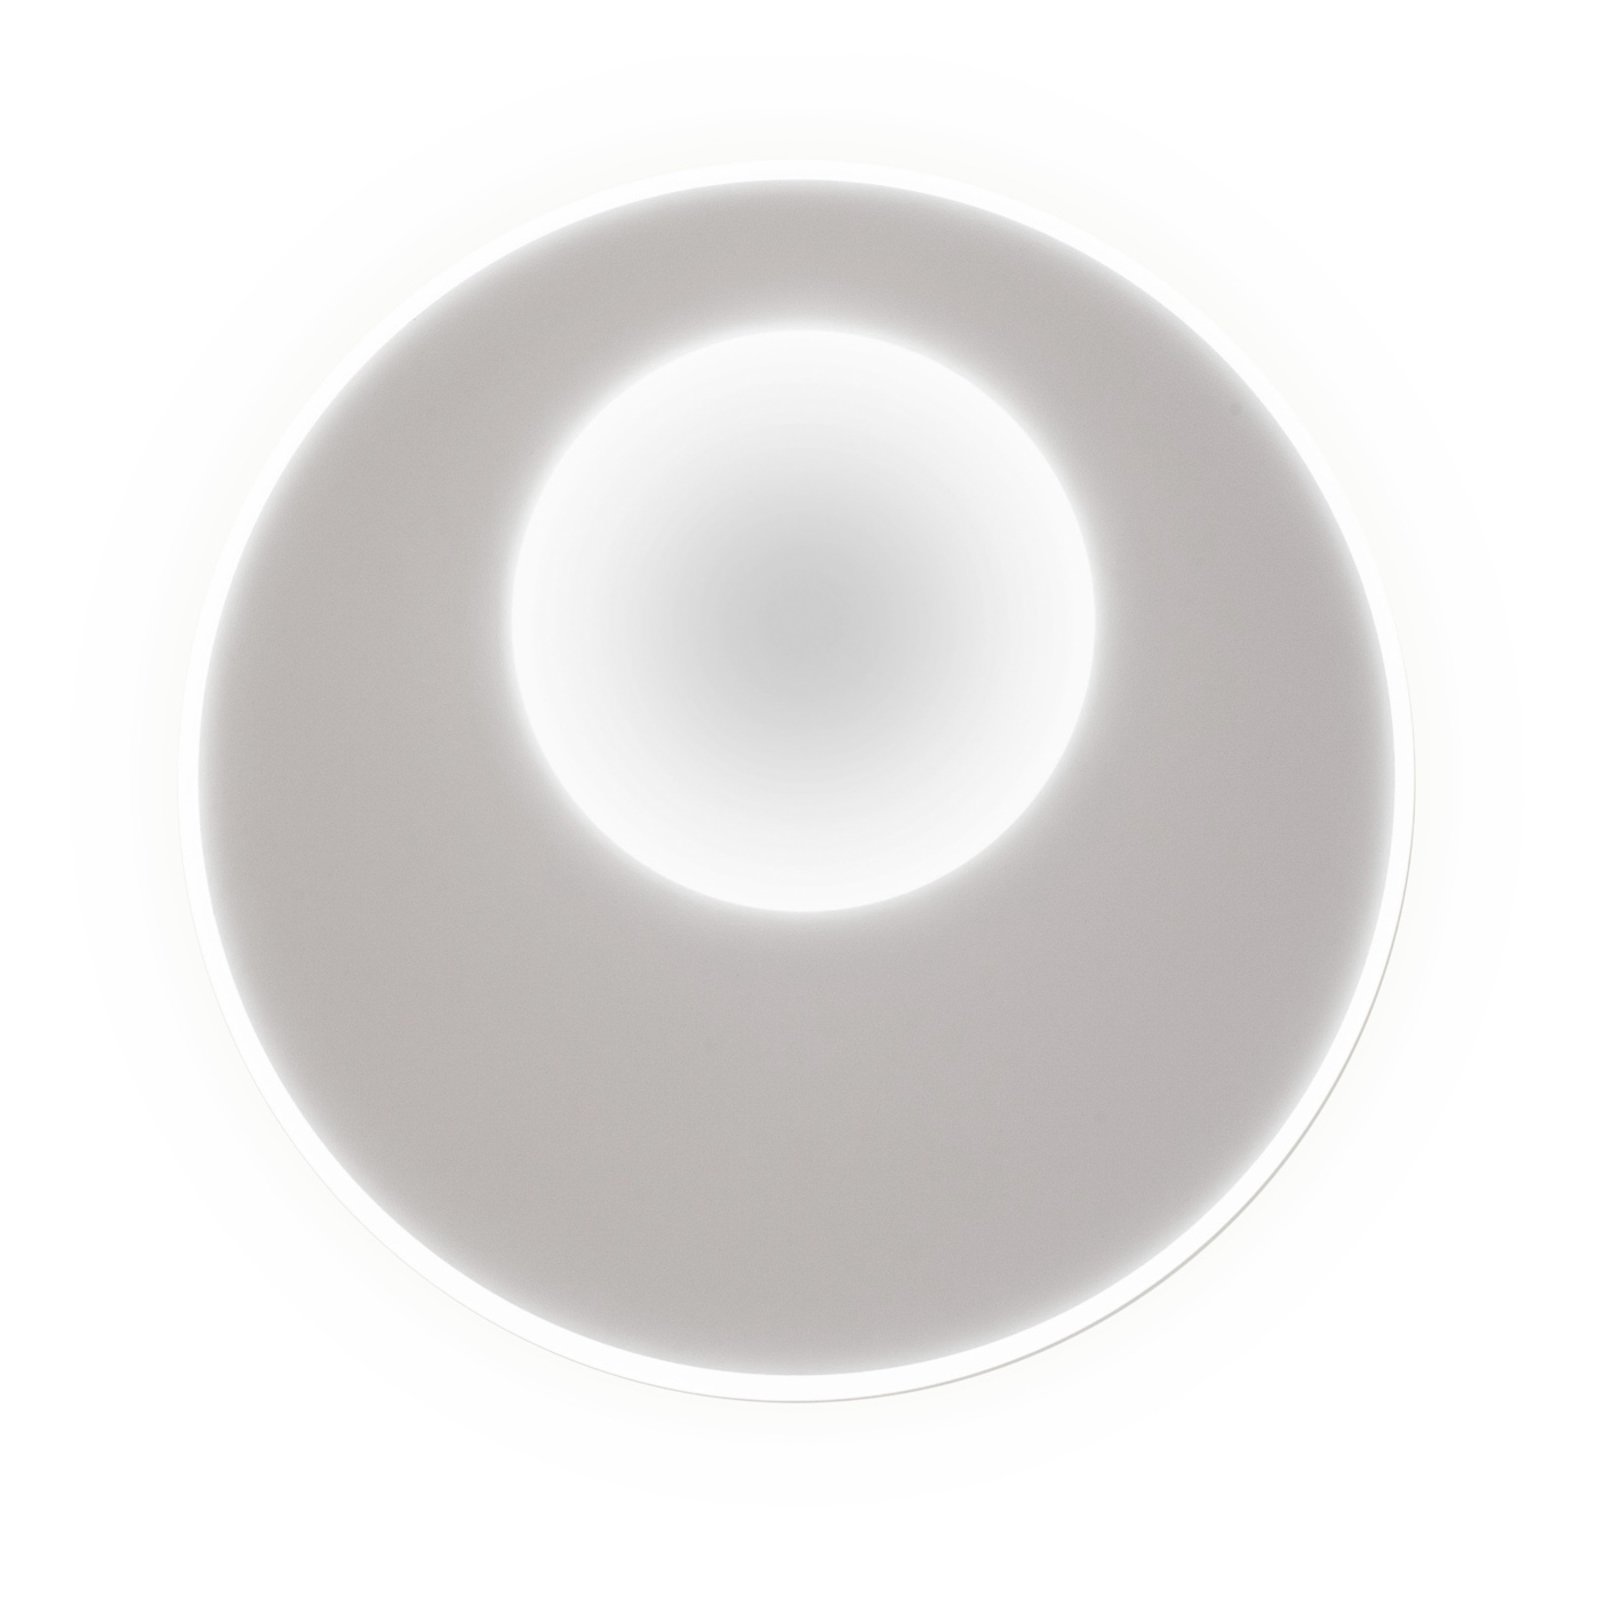 Plafoniera LED Krater bianco tunable white dimming